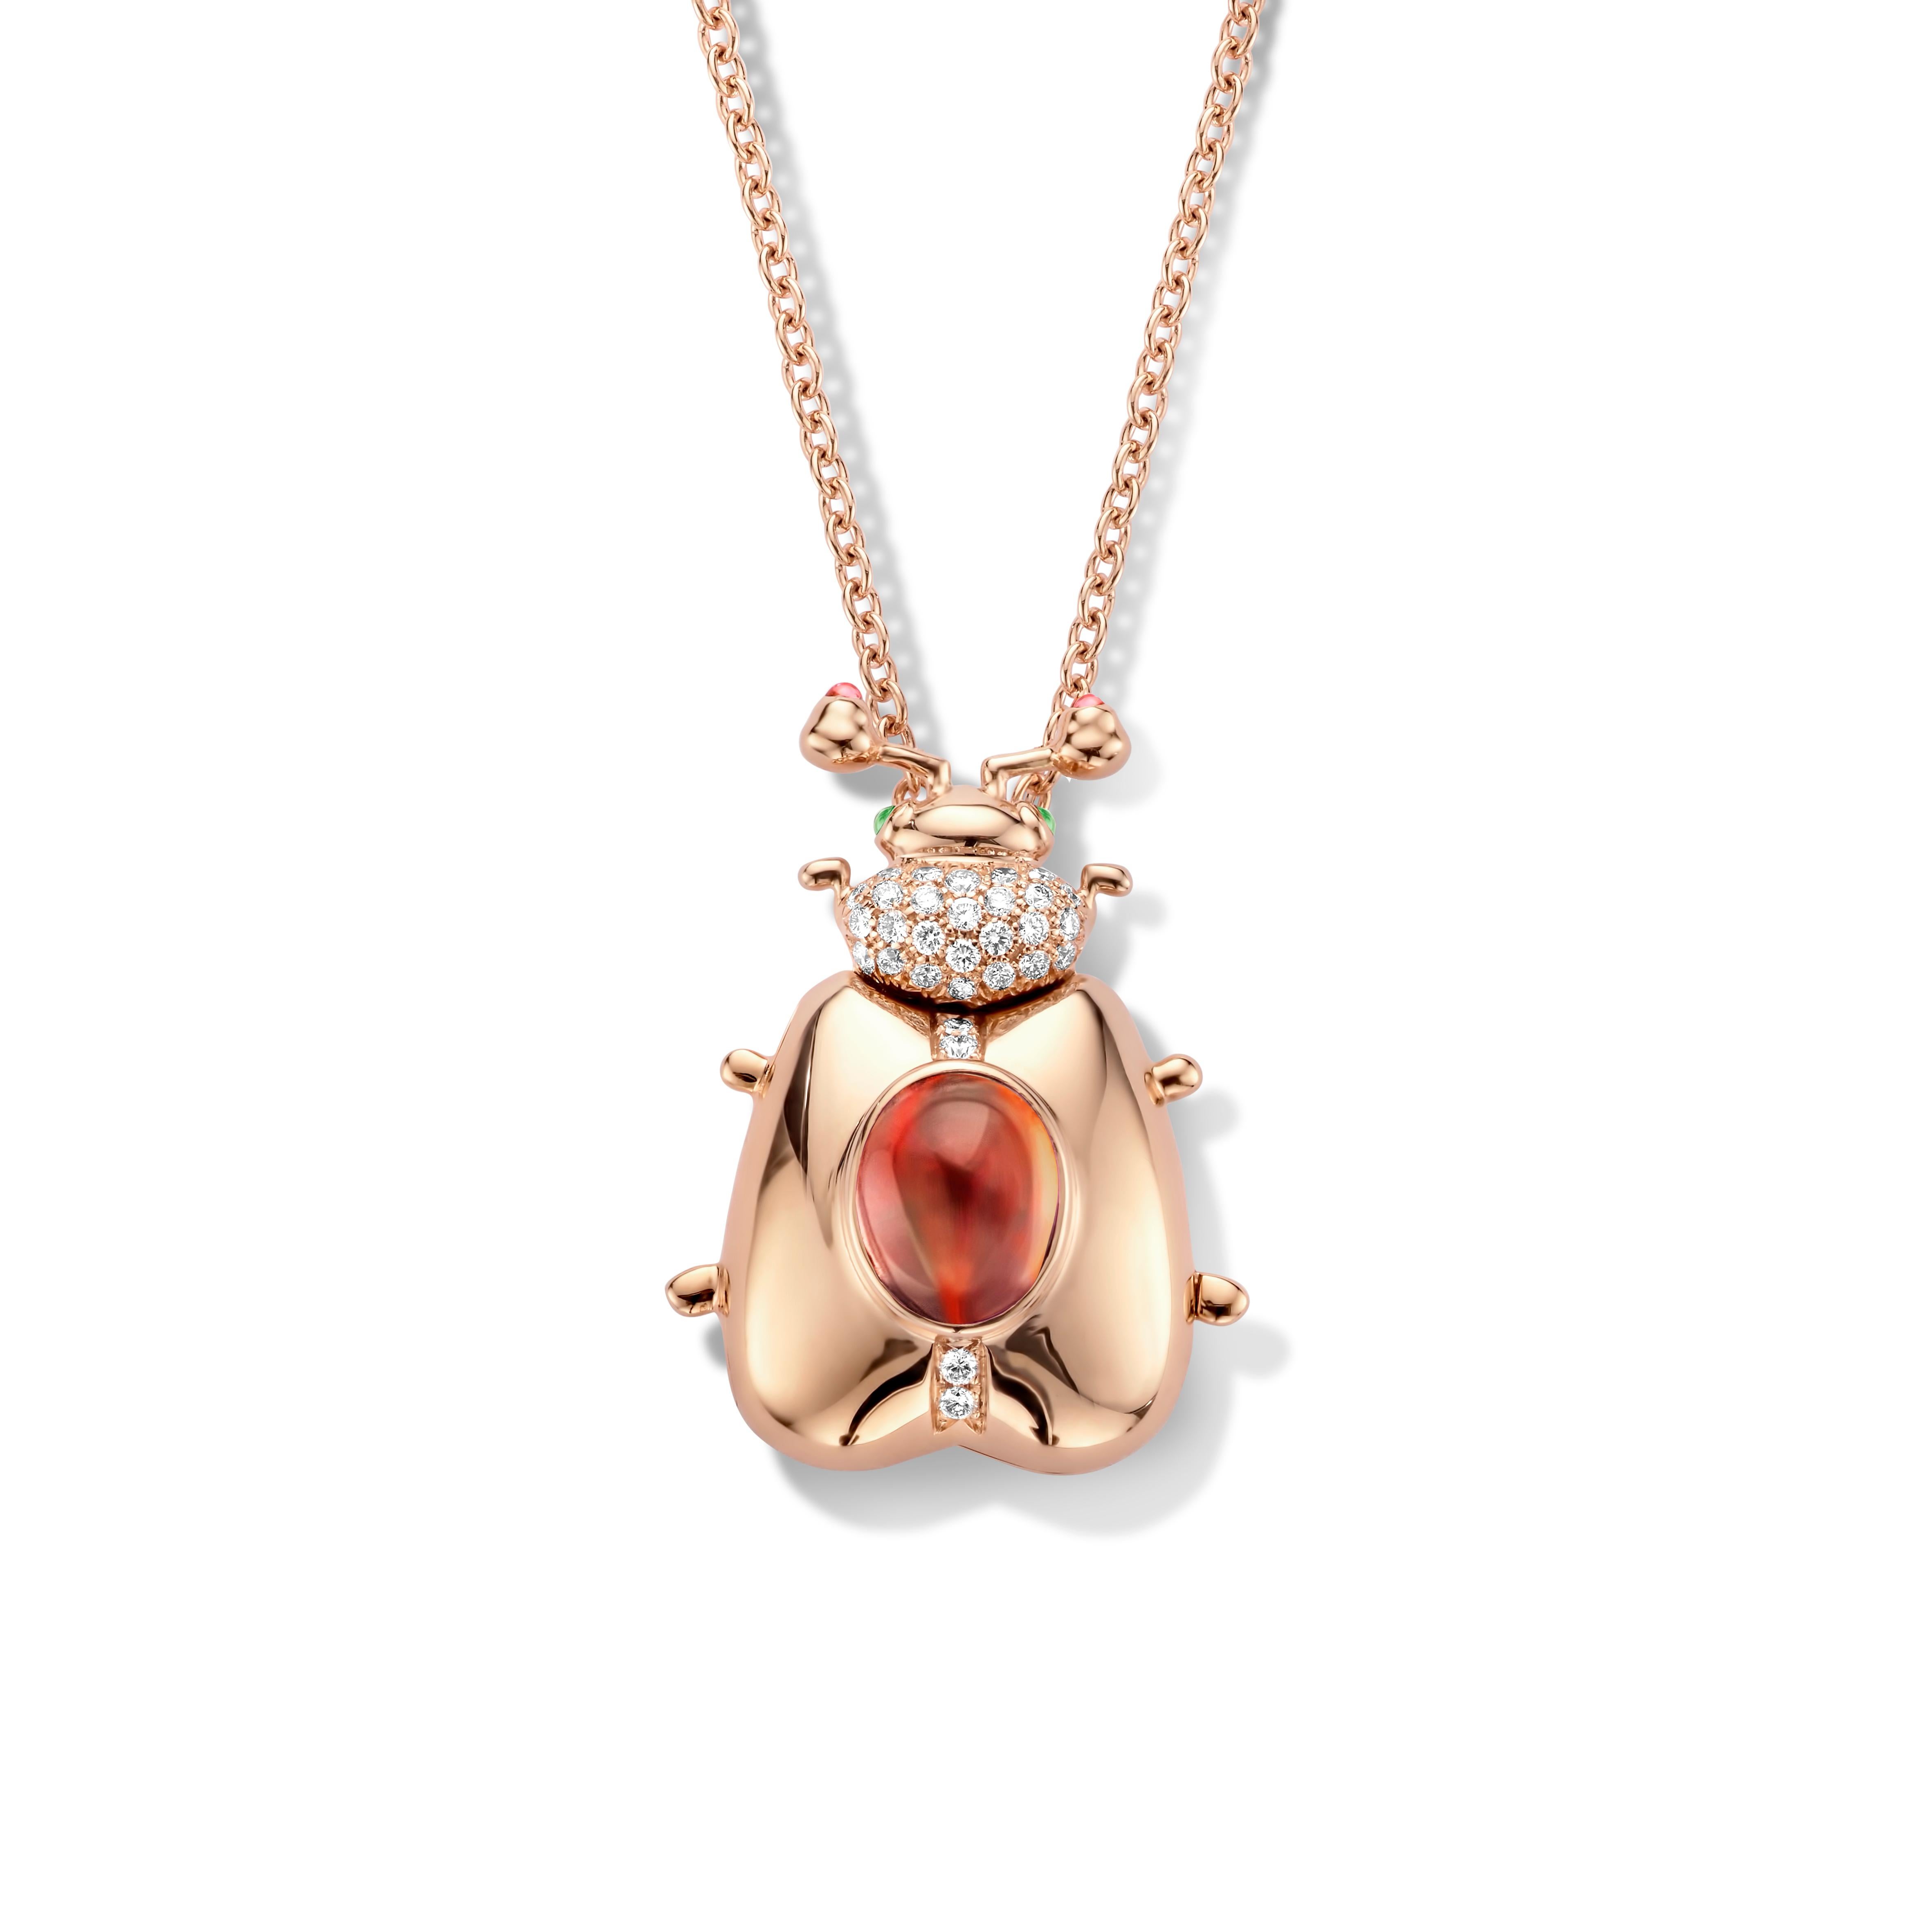 One of a kind lucky beetle necklace in 18 Karat rose gold 16g set with the finest diamonds in brilliant cut 0,31Ct (VVS/DEF quality) and one natural, mandarin garnet in oval cabochon cut 3,00Ct. 

The feelers and the eyes of this adorable Goldbeetle